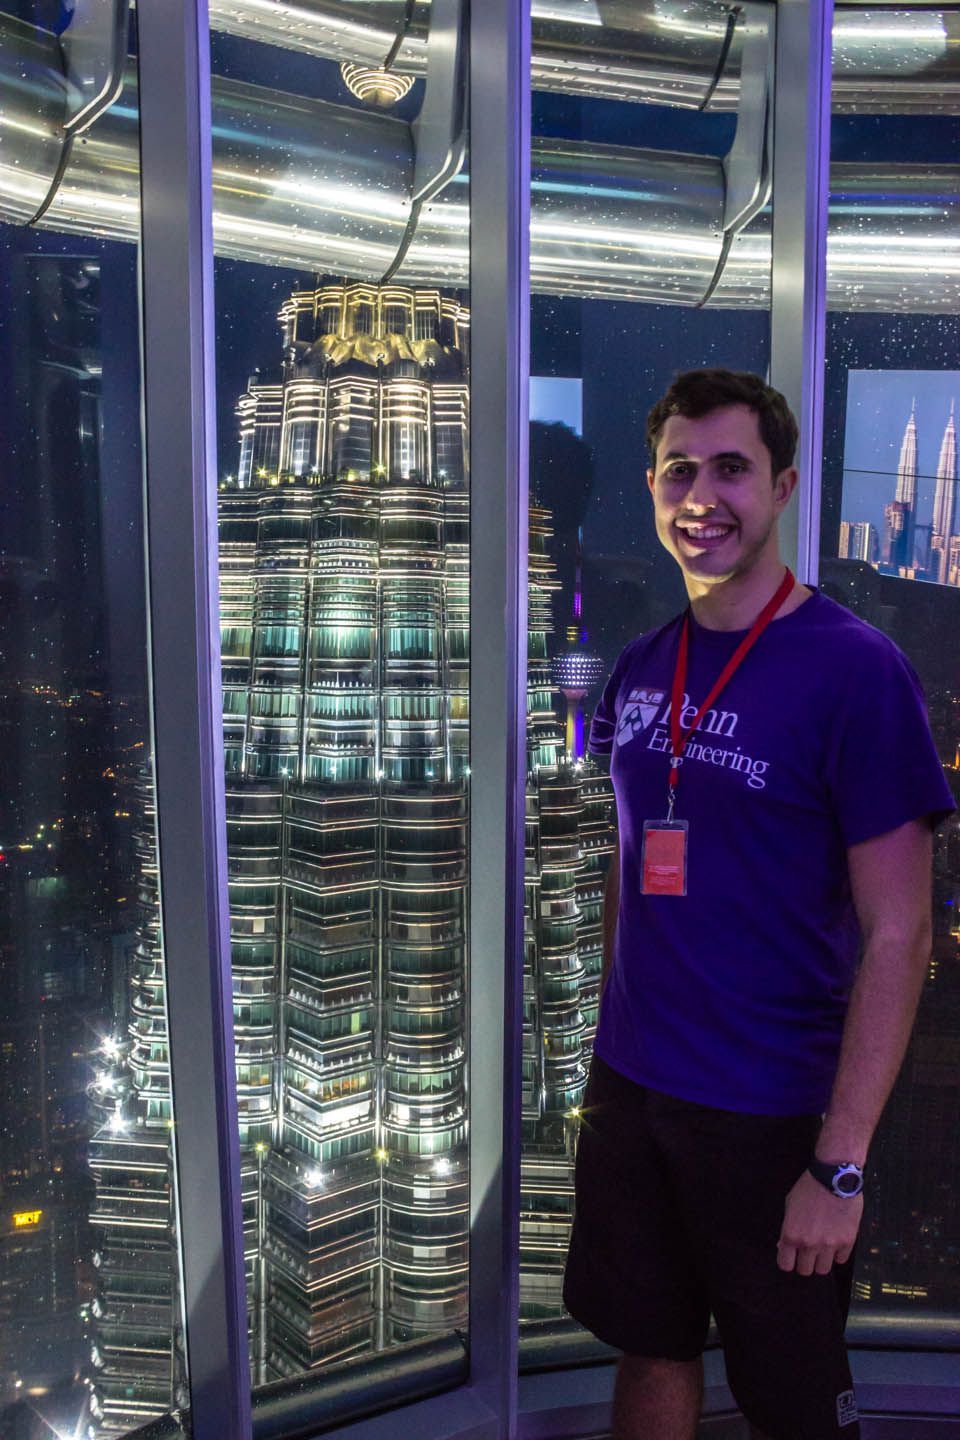 Carlos at the 86th floor observatory of the Petronas Twin Towers, Kuala Lumpur, Malaysia